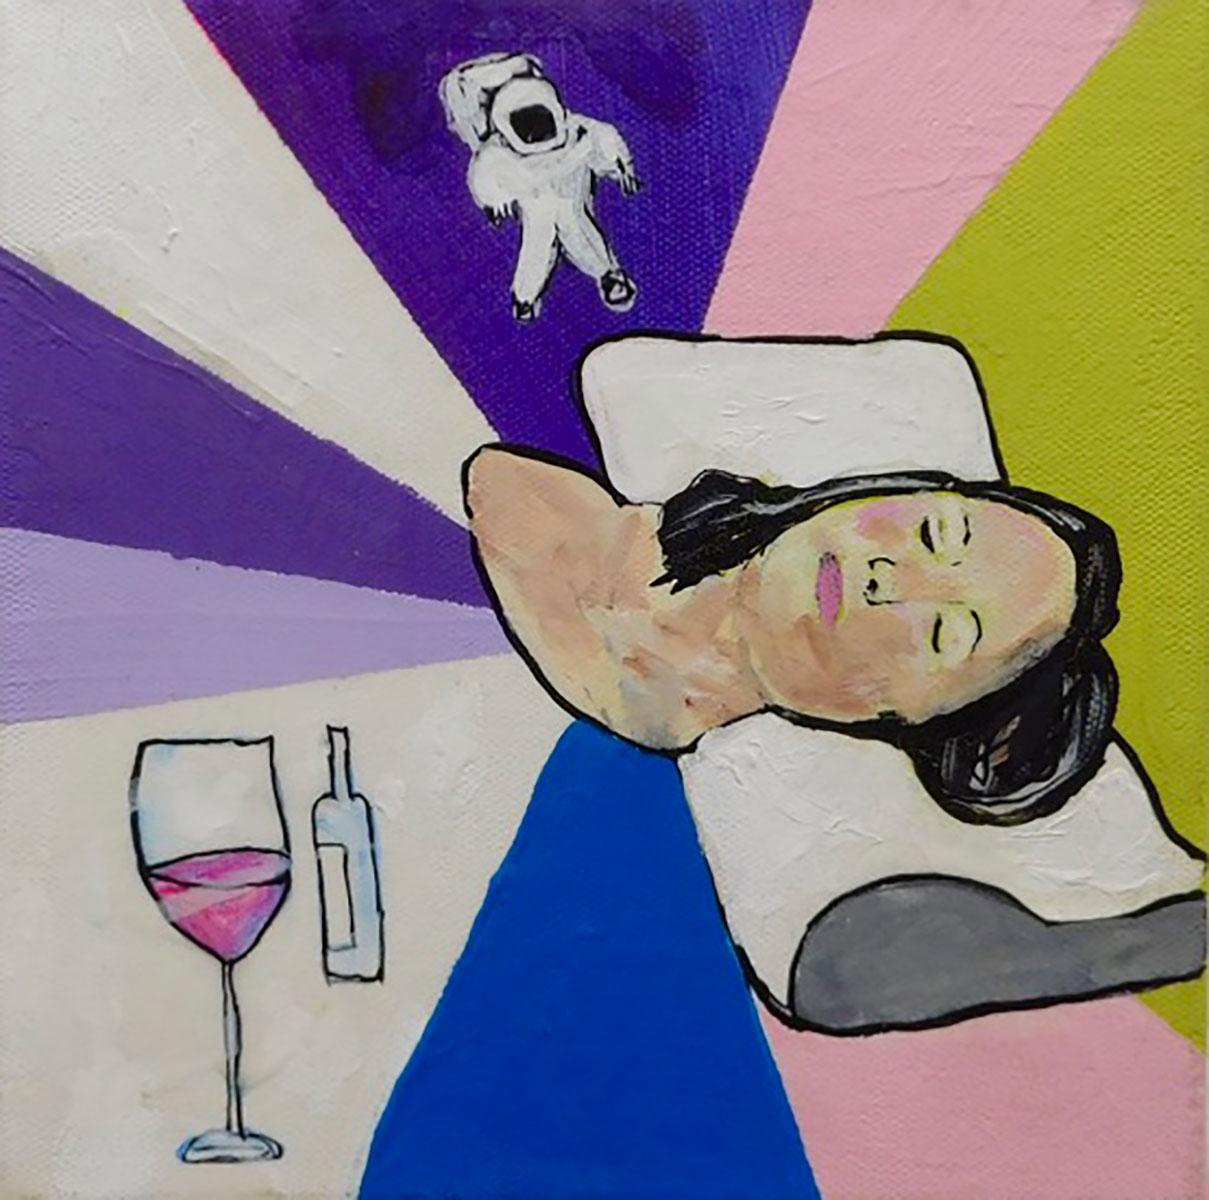 Brian Leo
Pillow and Wine
2015
Acrylic on stretched canvas
8 x 8 inches 

Brian Leo was born in New Jersey in 1976, and is currently living in New York City. He is a graduate of Rutgers’ Mason Gross School of Art in 1999. His work has received